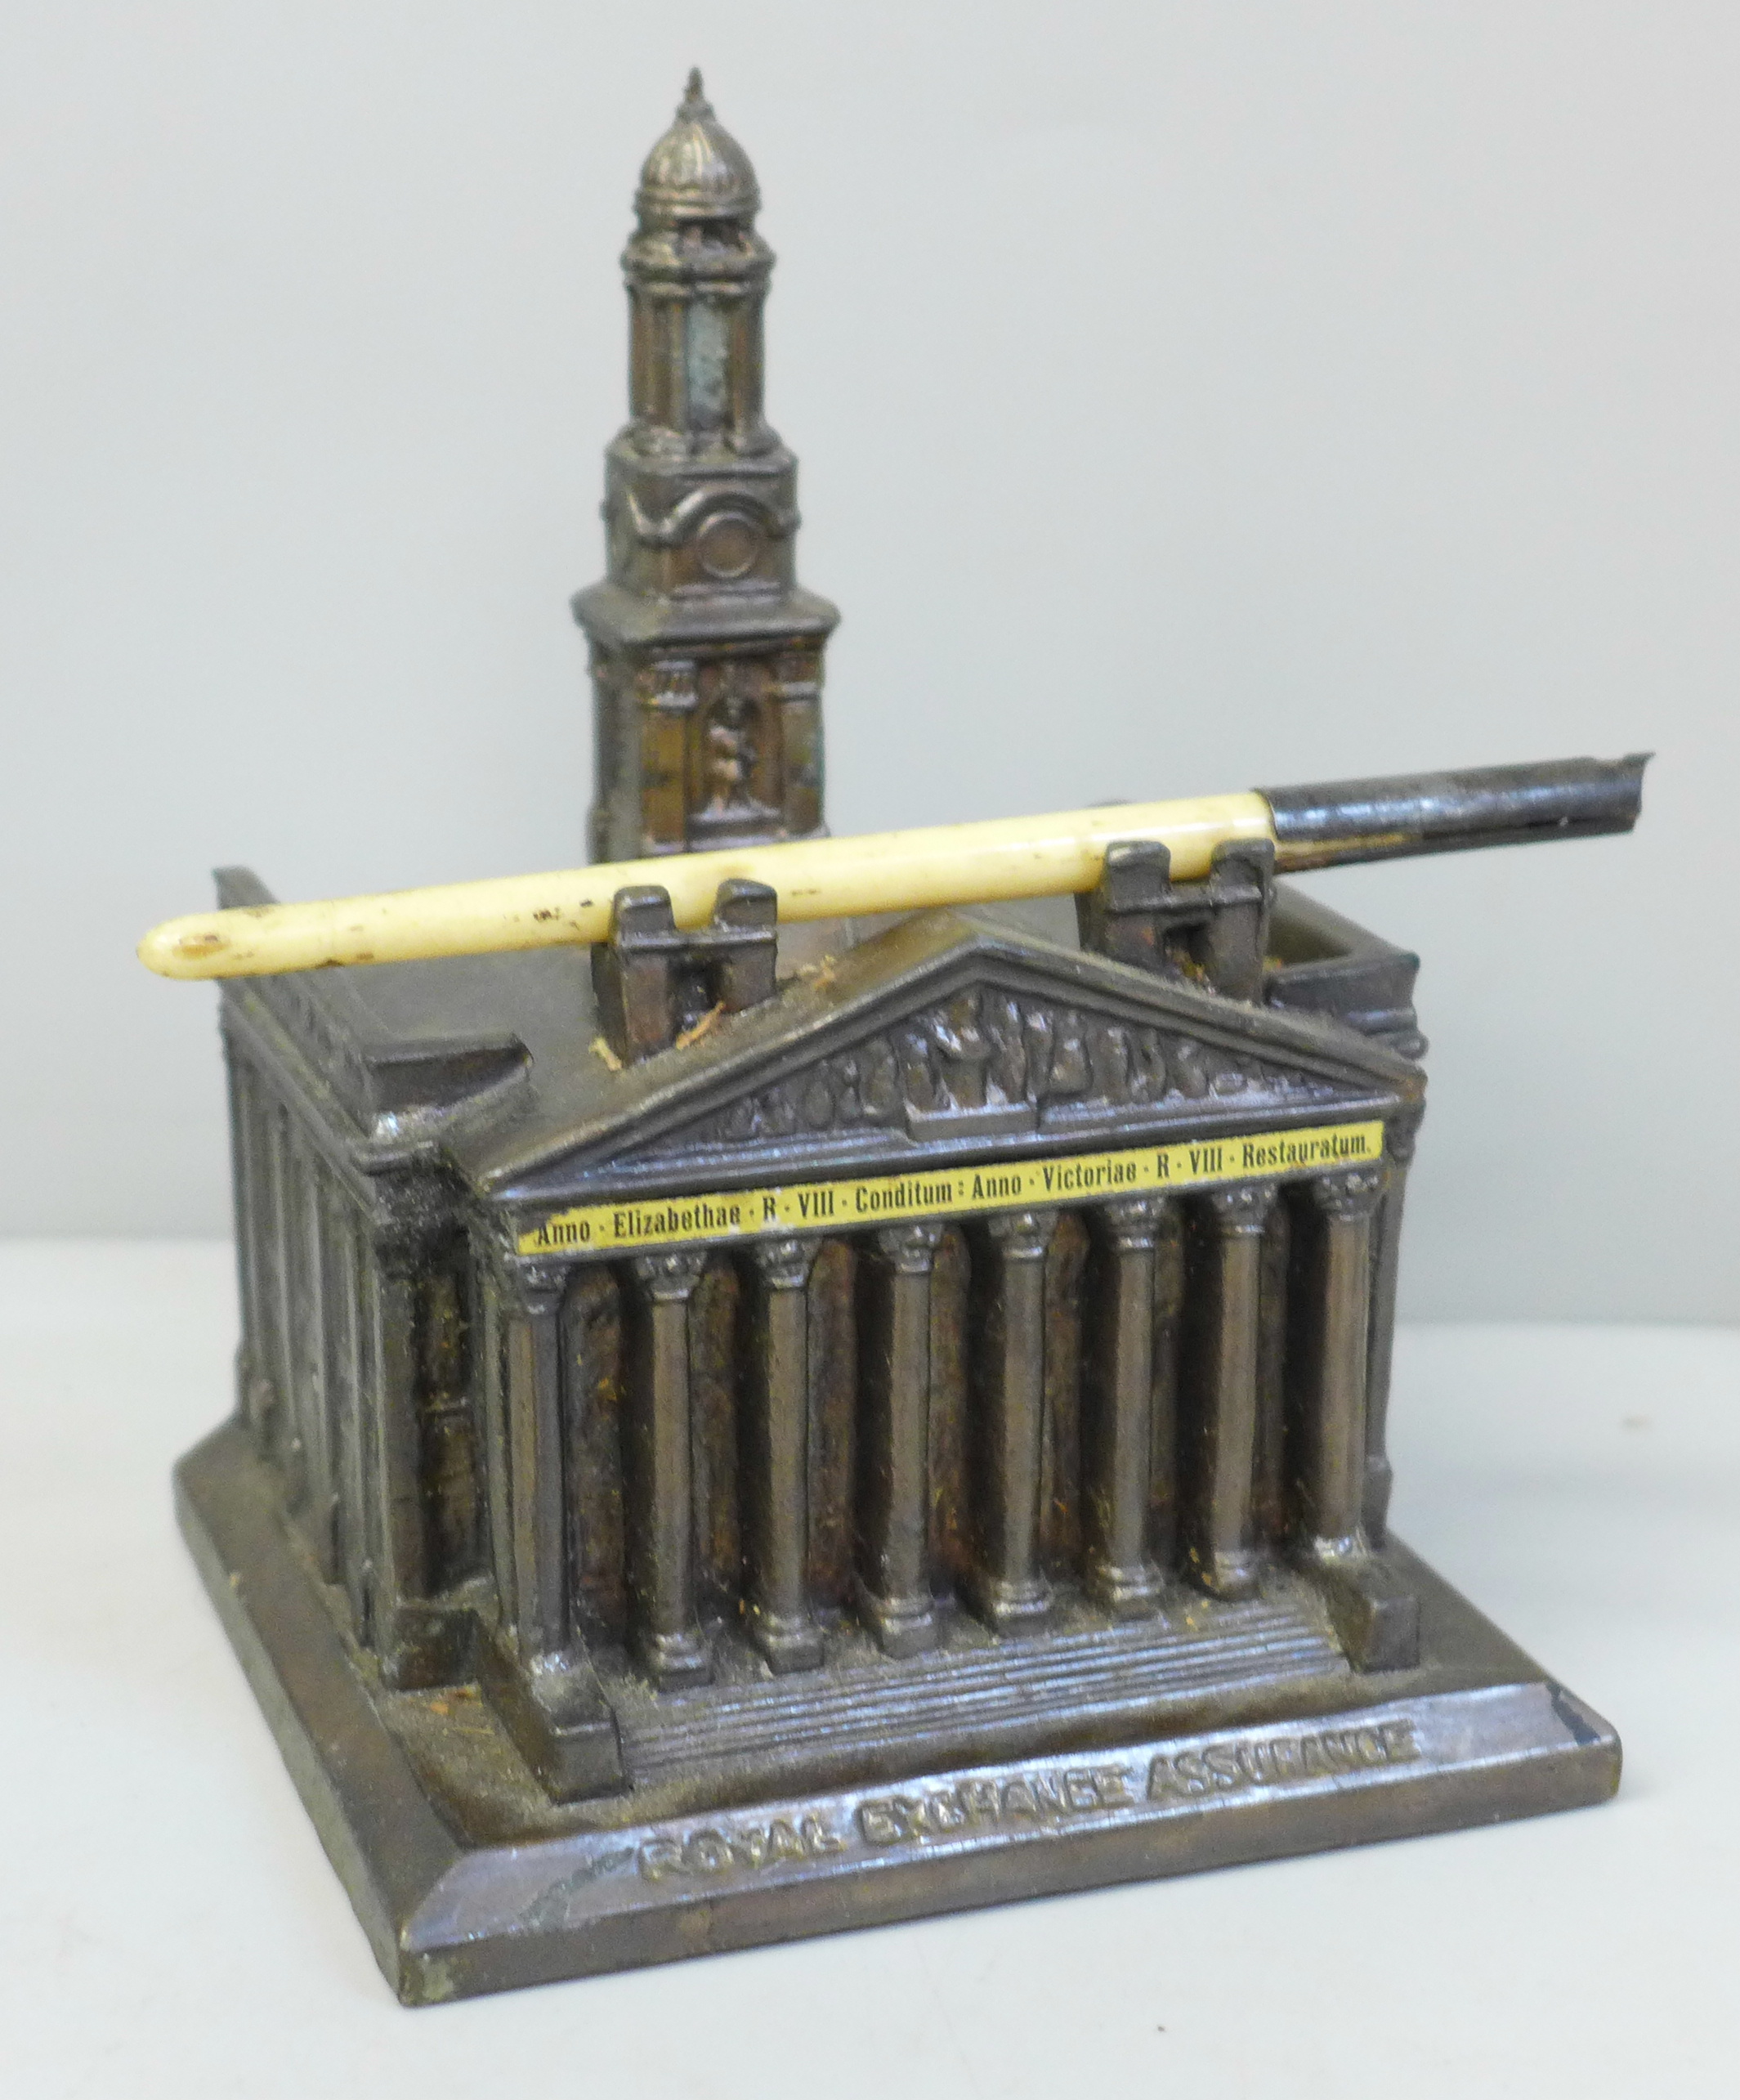 A Royal Exchange Assurance cast metal novelty inkwell